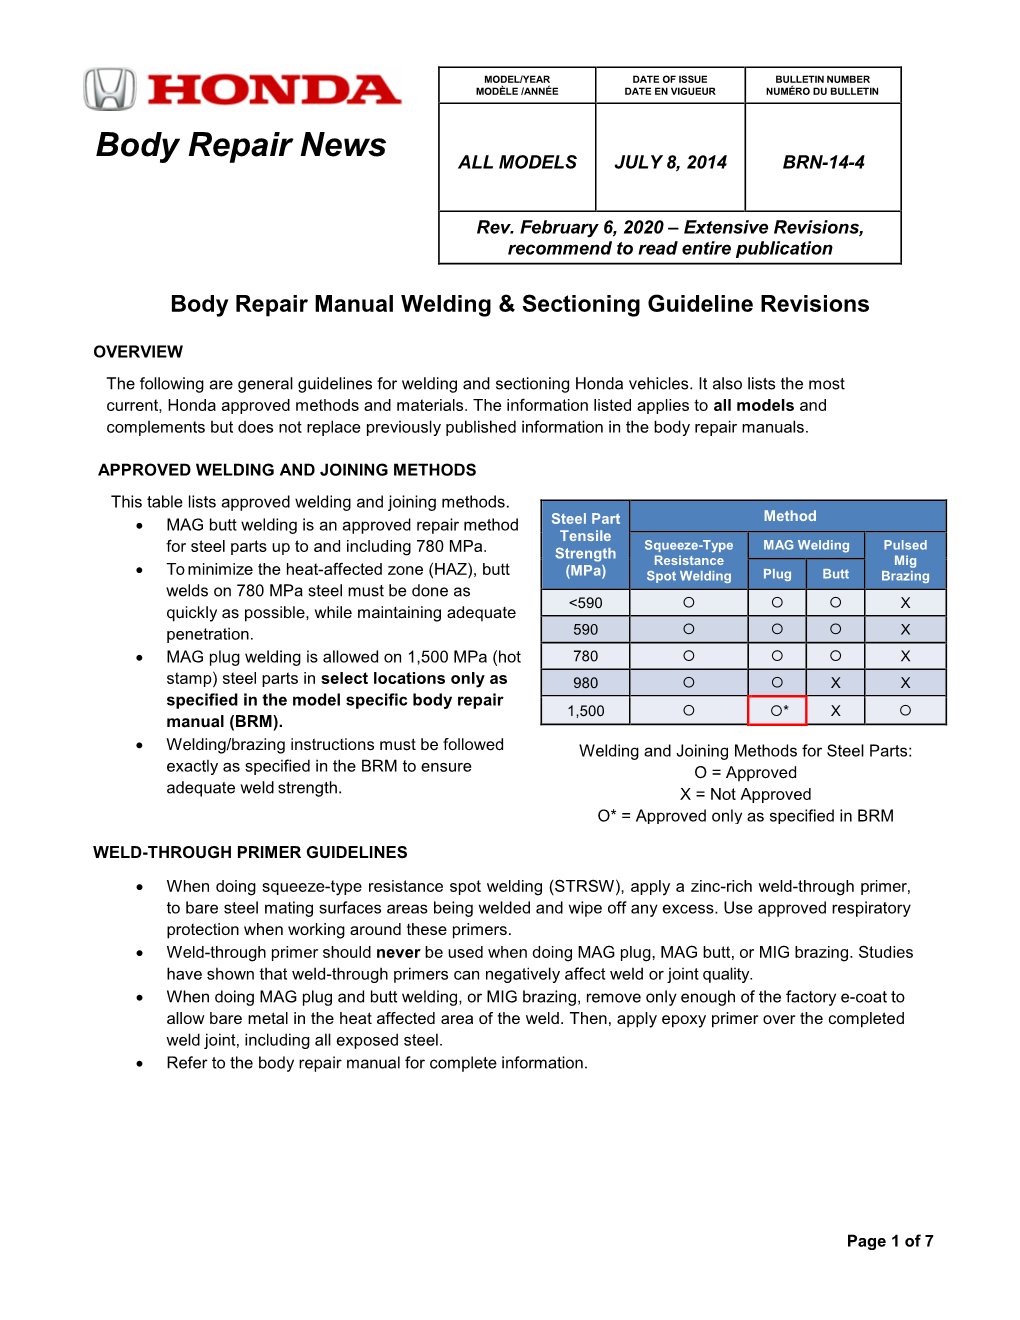 Body Repair Manual Welding & Sectioning Guideline Revisions